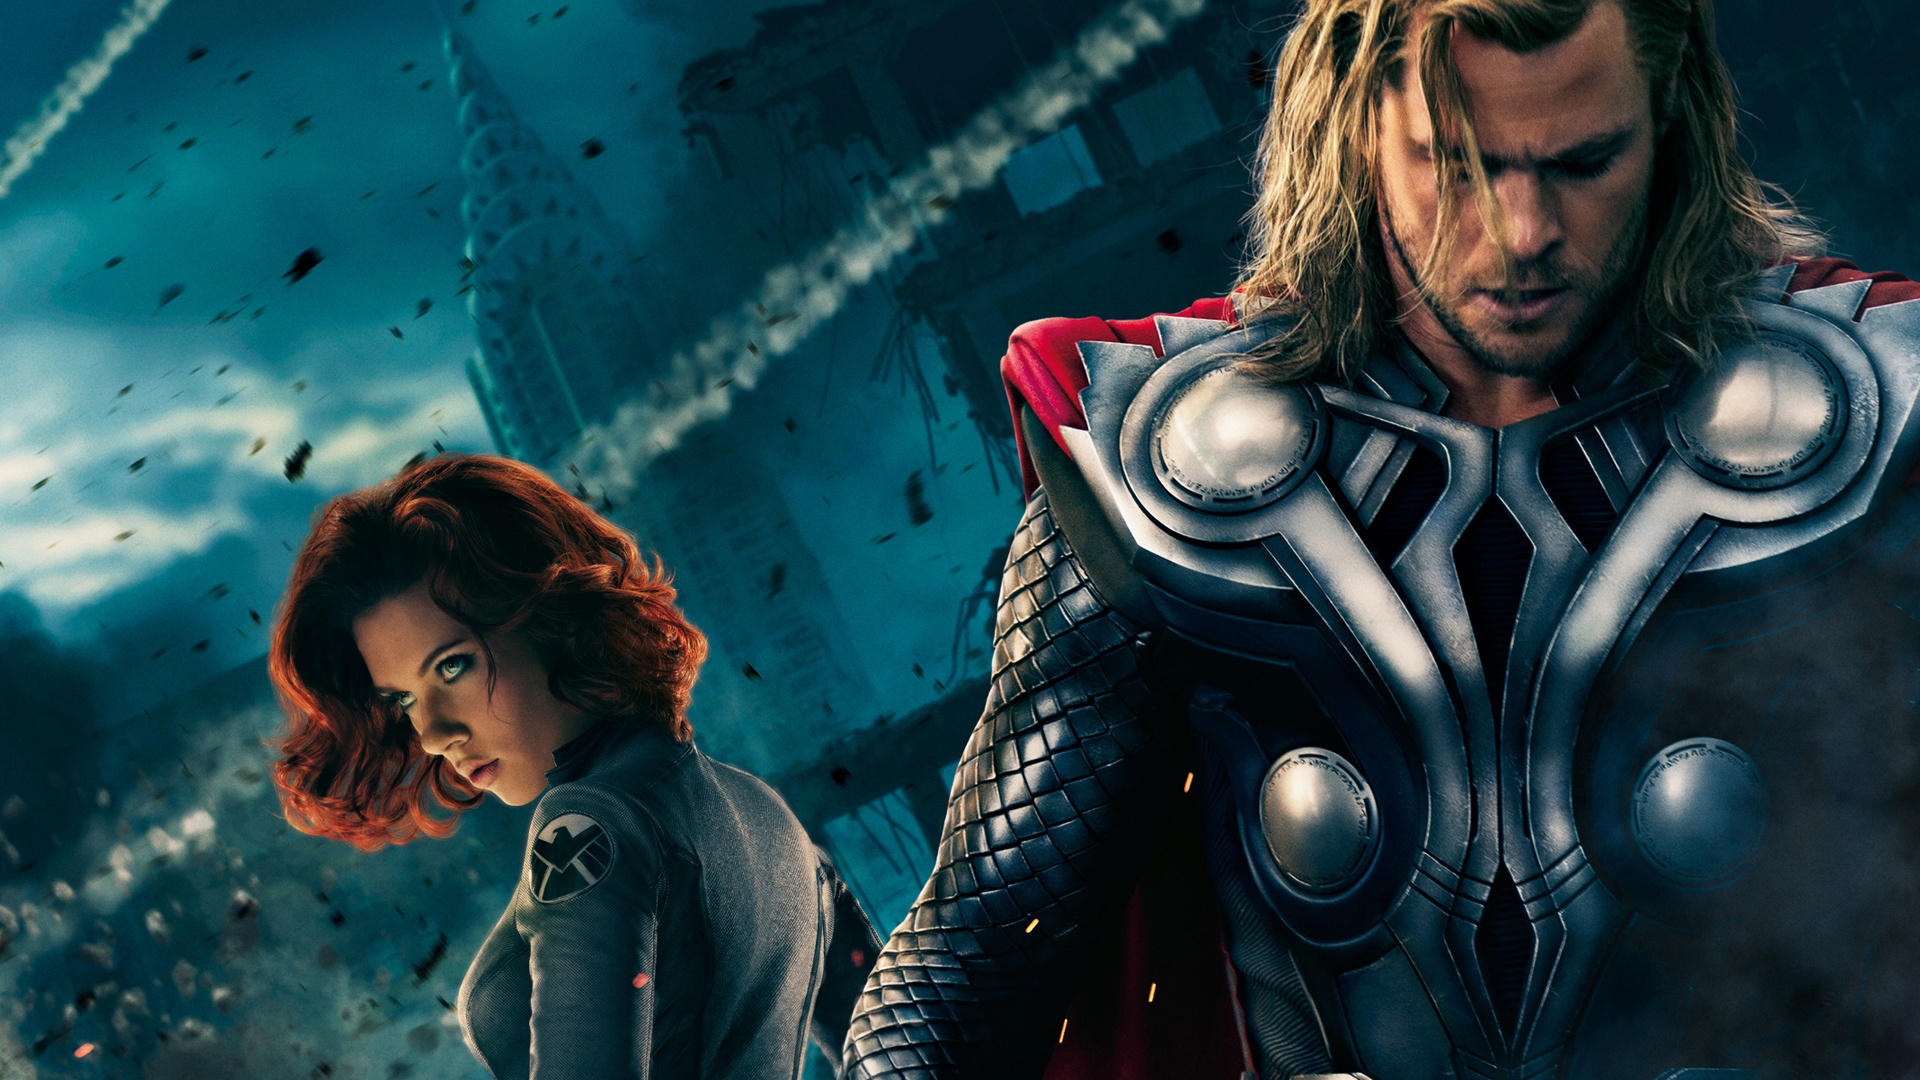 Thor in The Avengers Wallpapers | HD Wallpapers